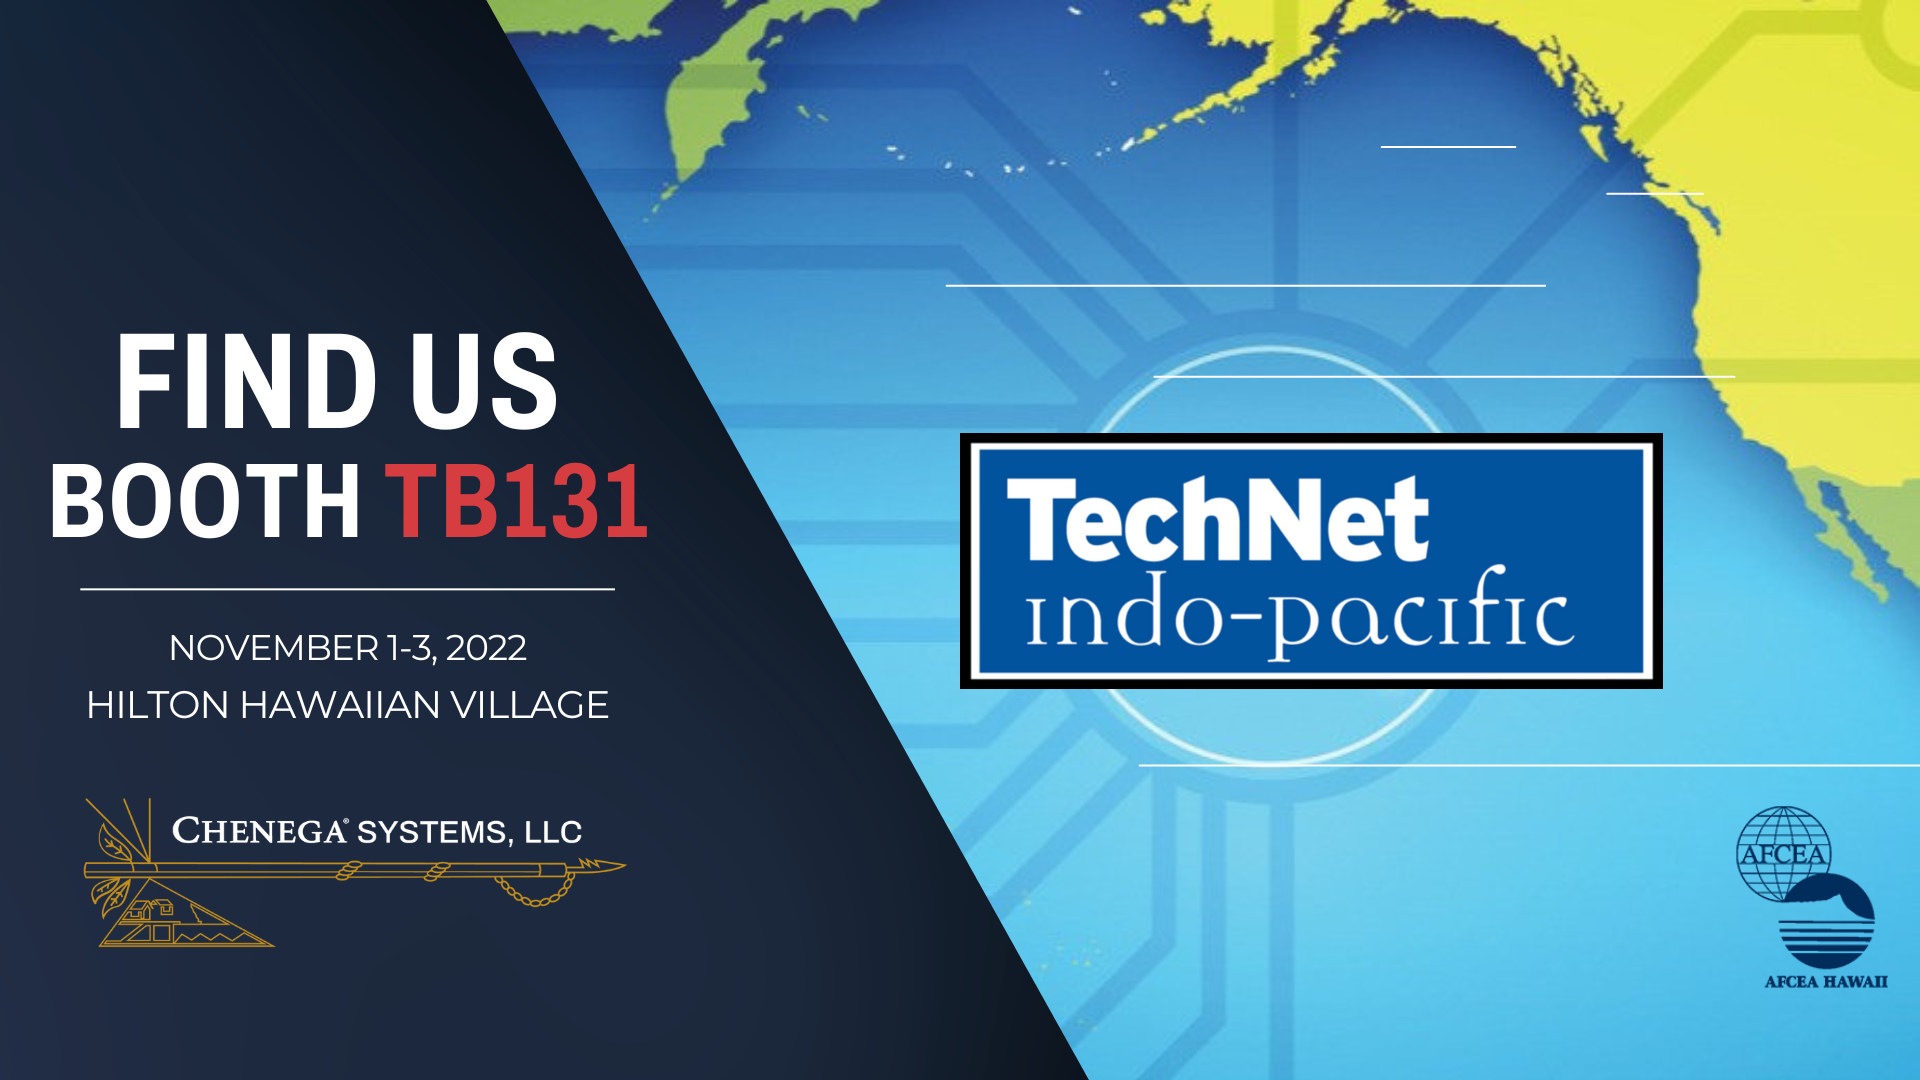 Chenega Systems to Exhibit at TechNet Indo-Pacific 2022